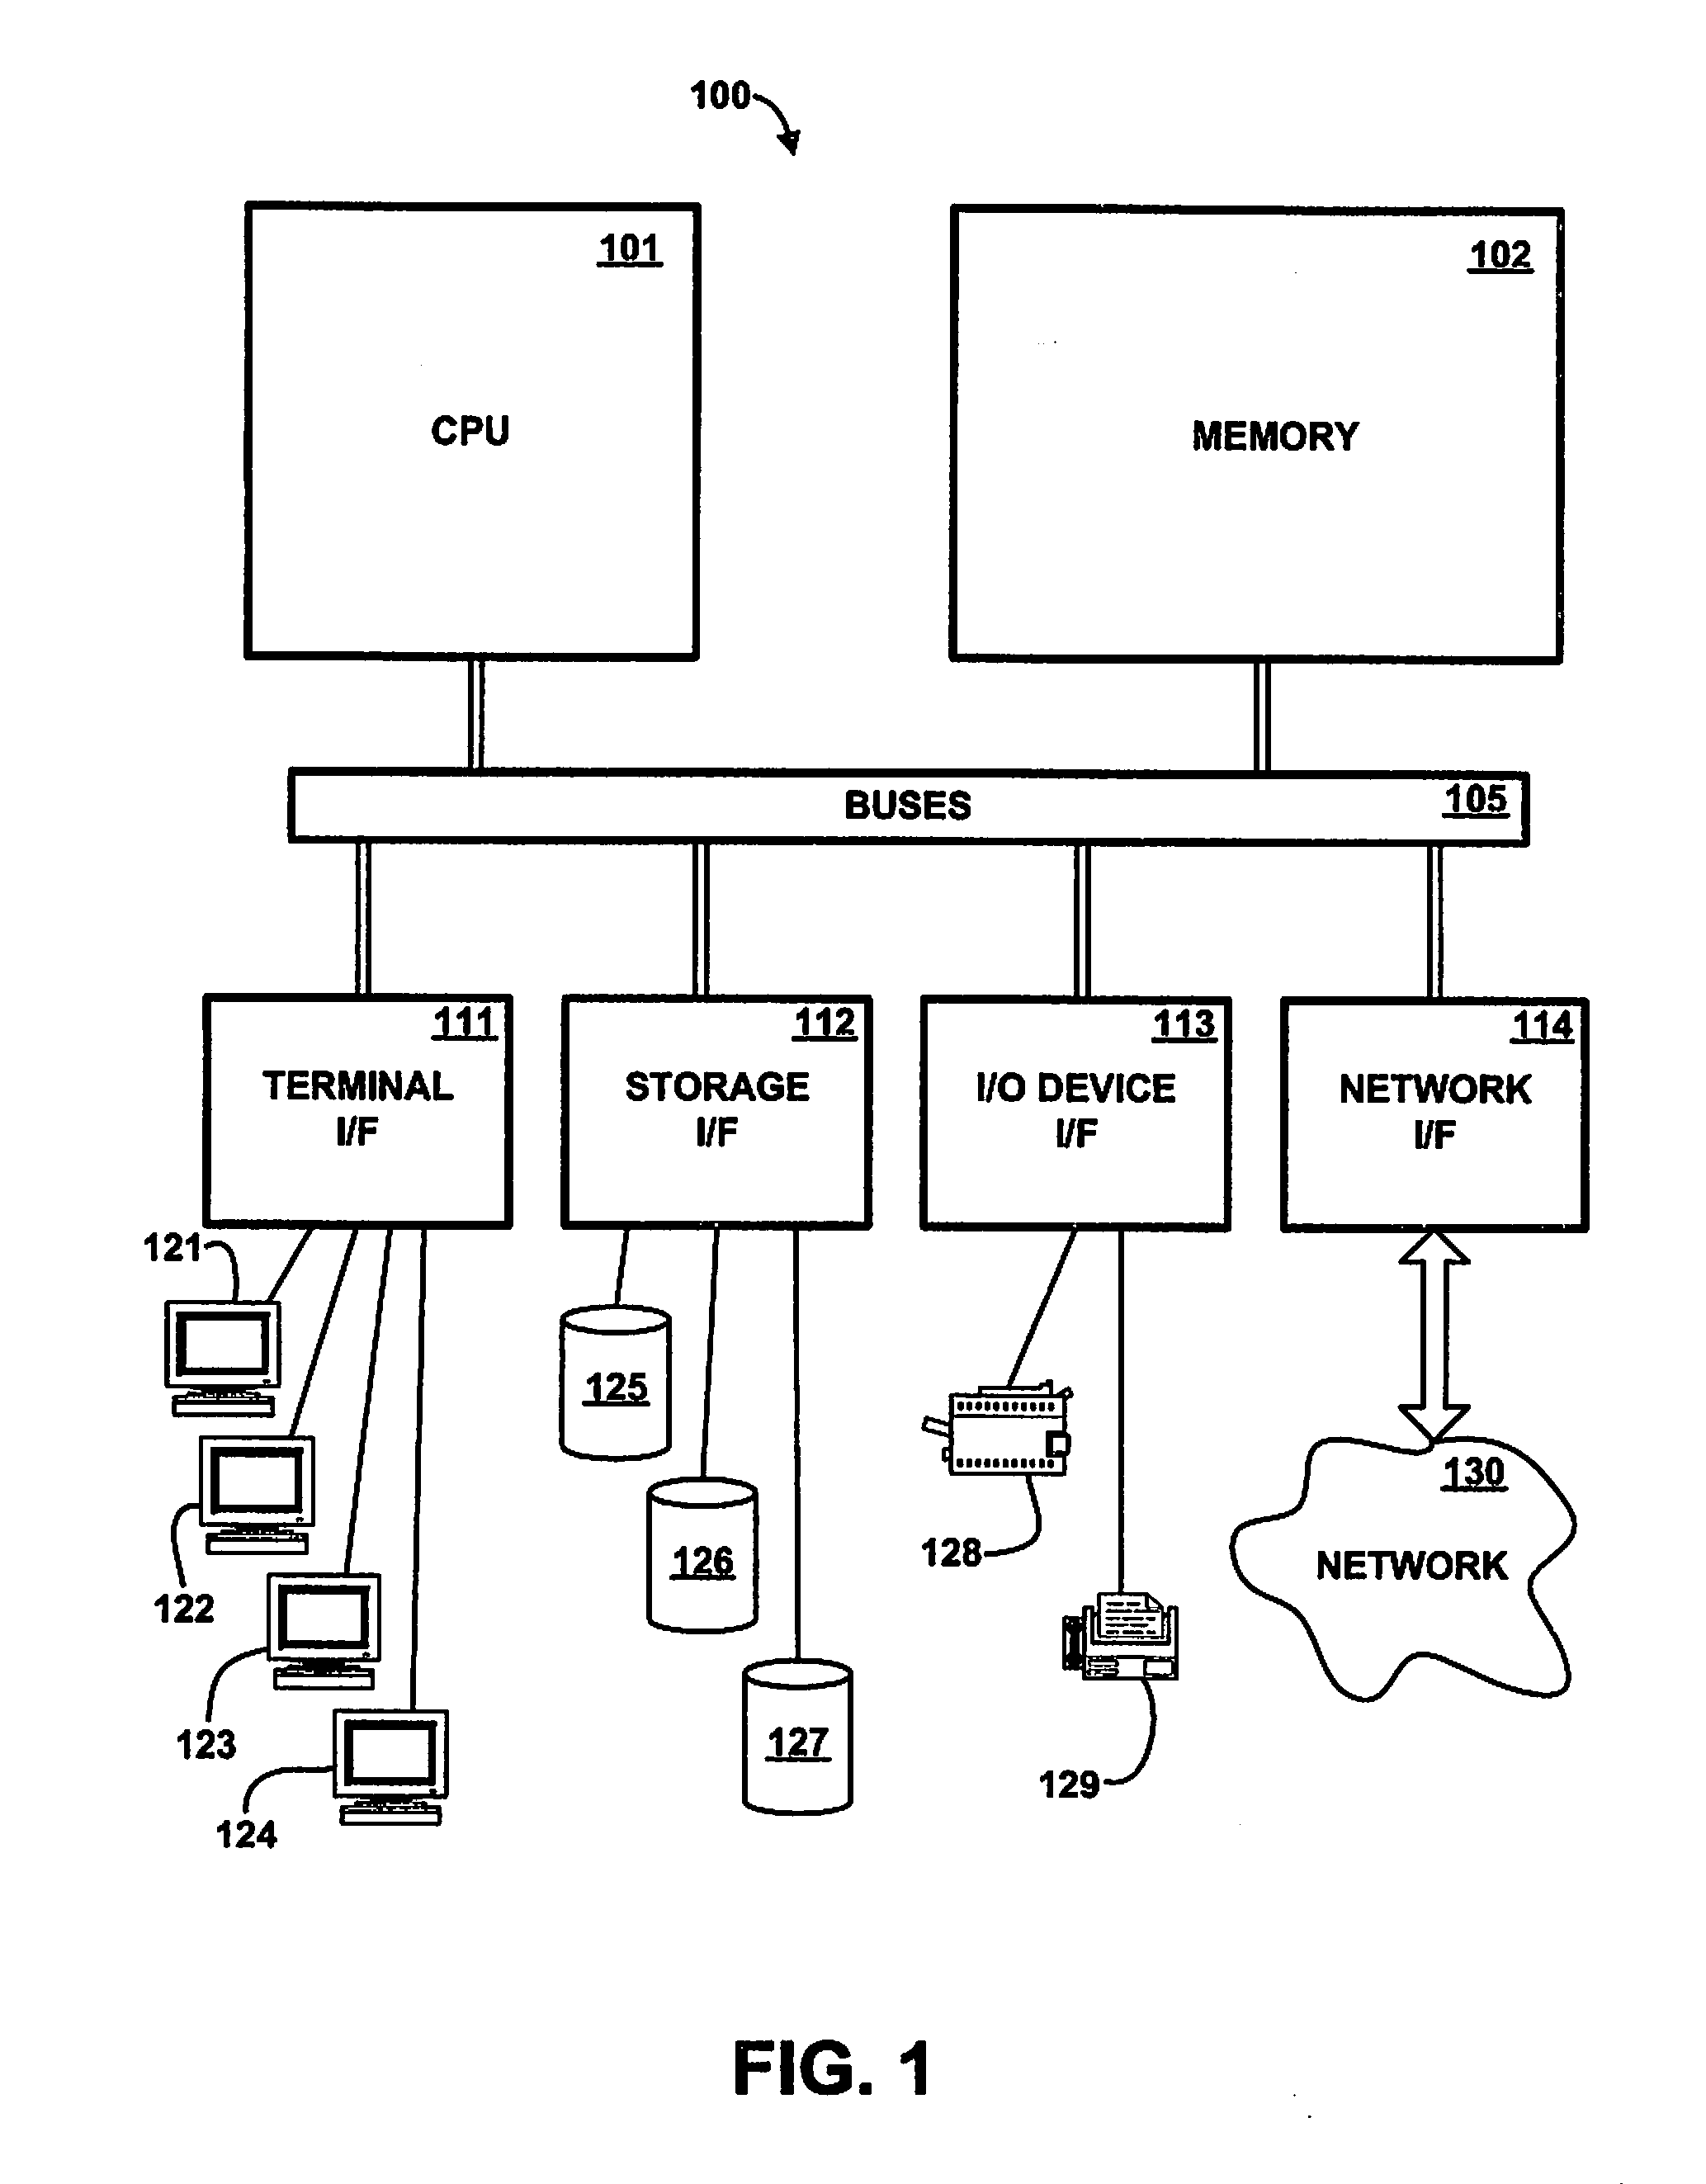 Method and Apparatus for Tracing Execution of Computer Programming Code Using Dynamic Trace Enablement